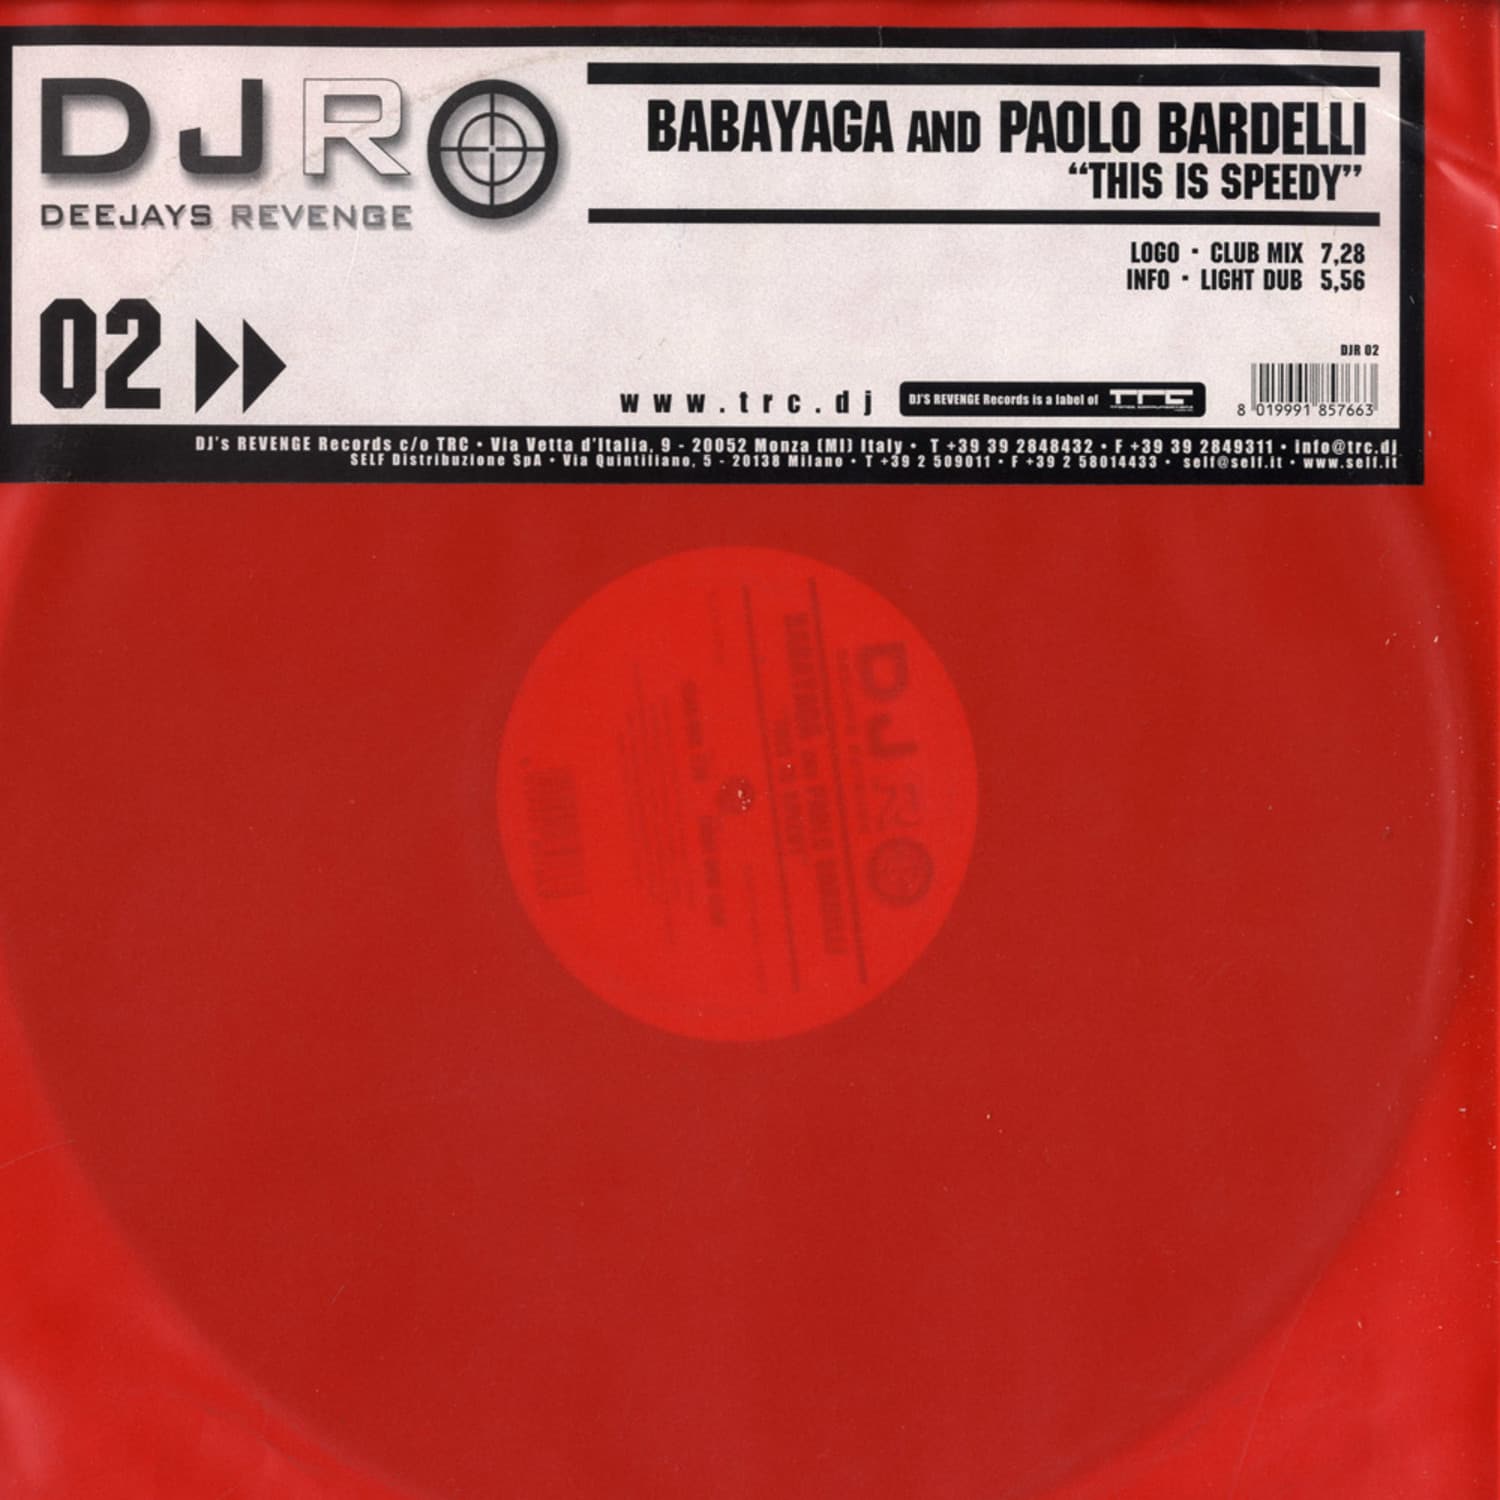 Babayaga and Paolo Bardelli - THIS IS SPEEDY